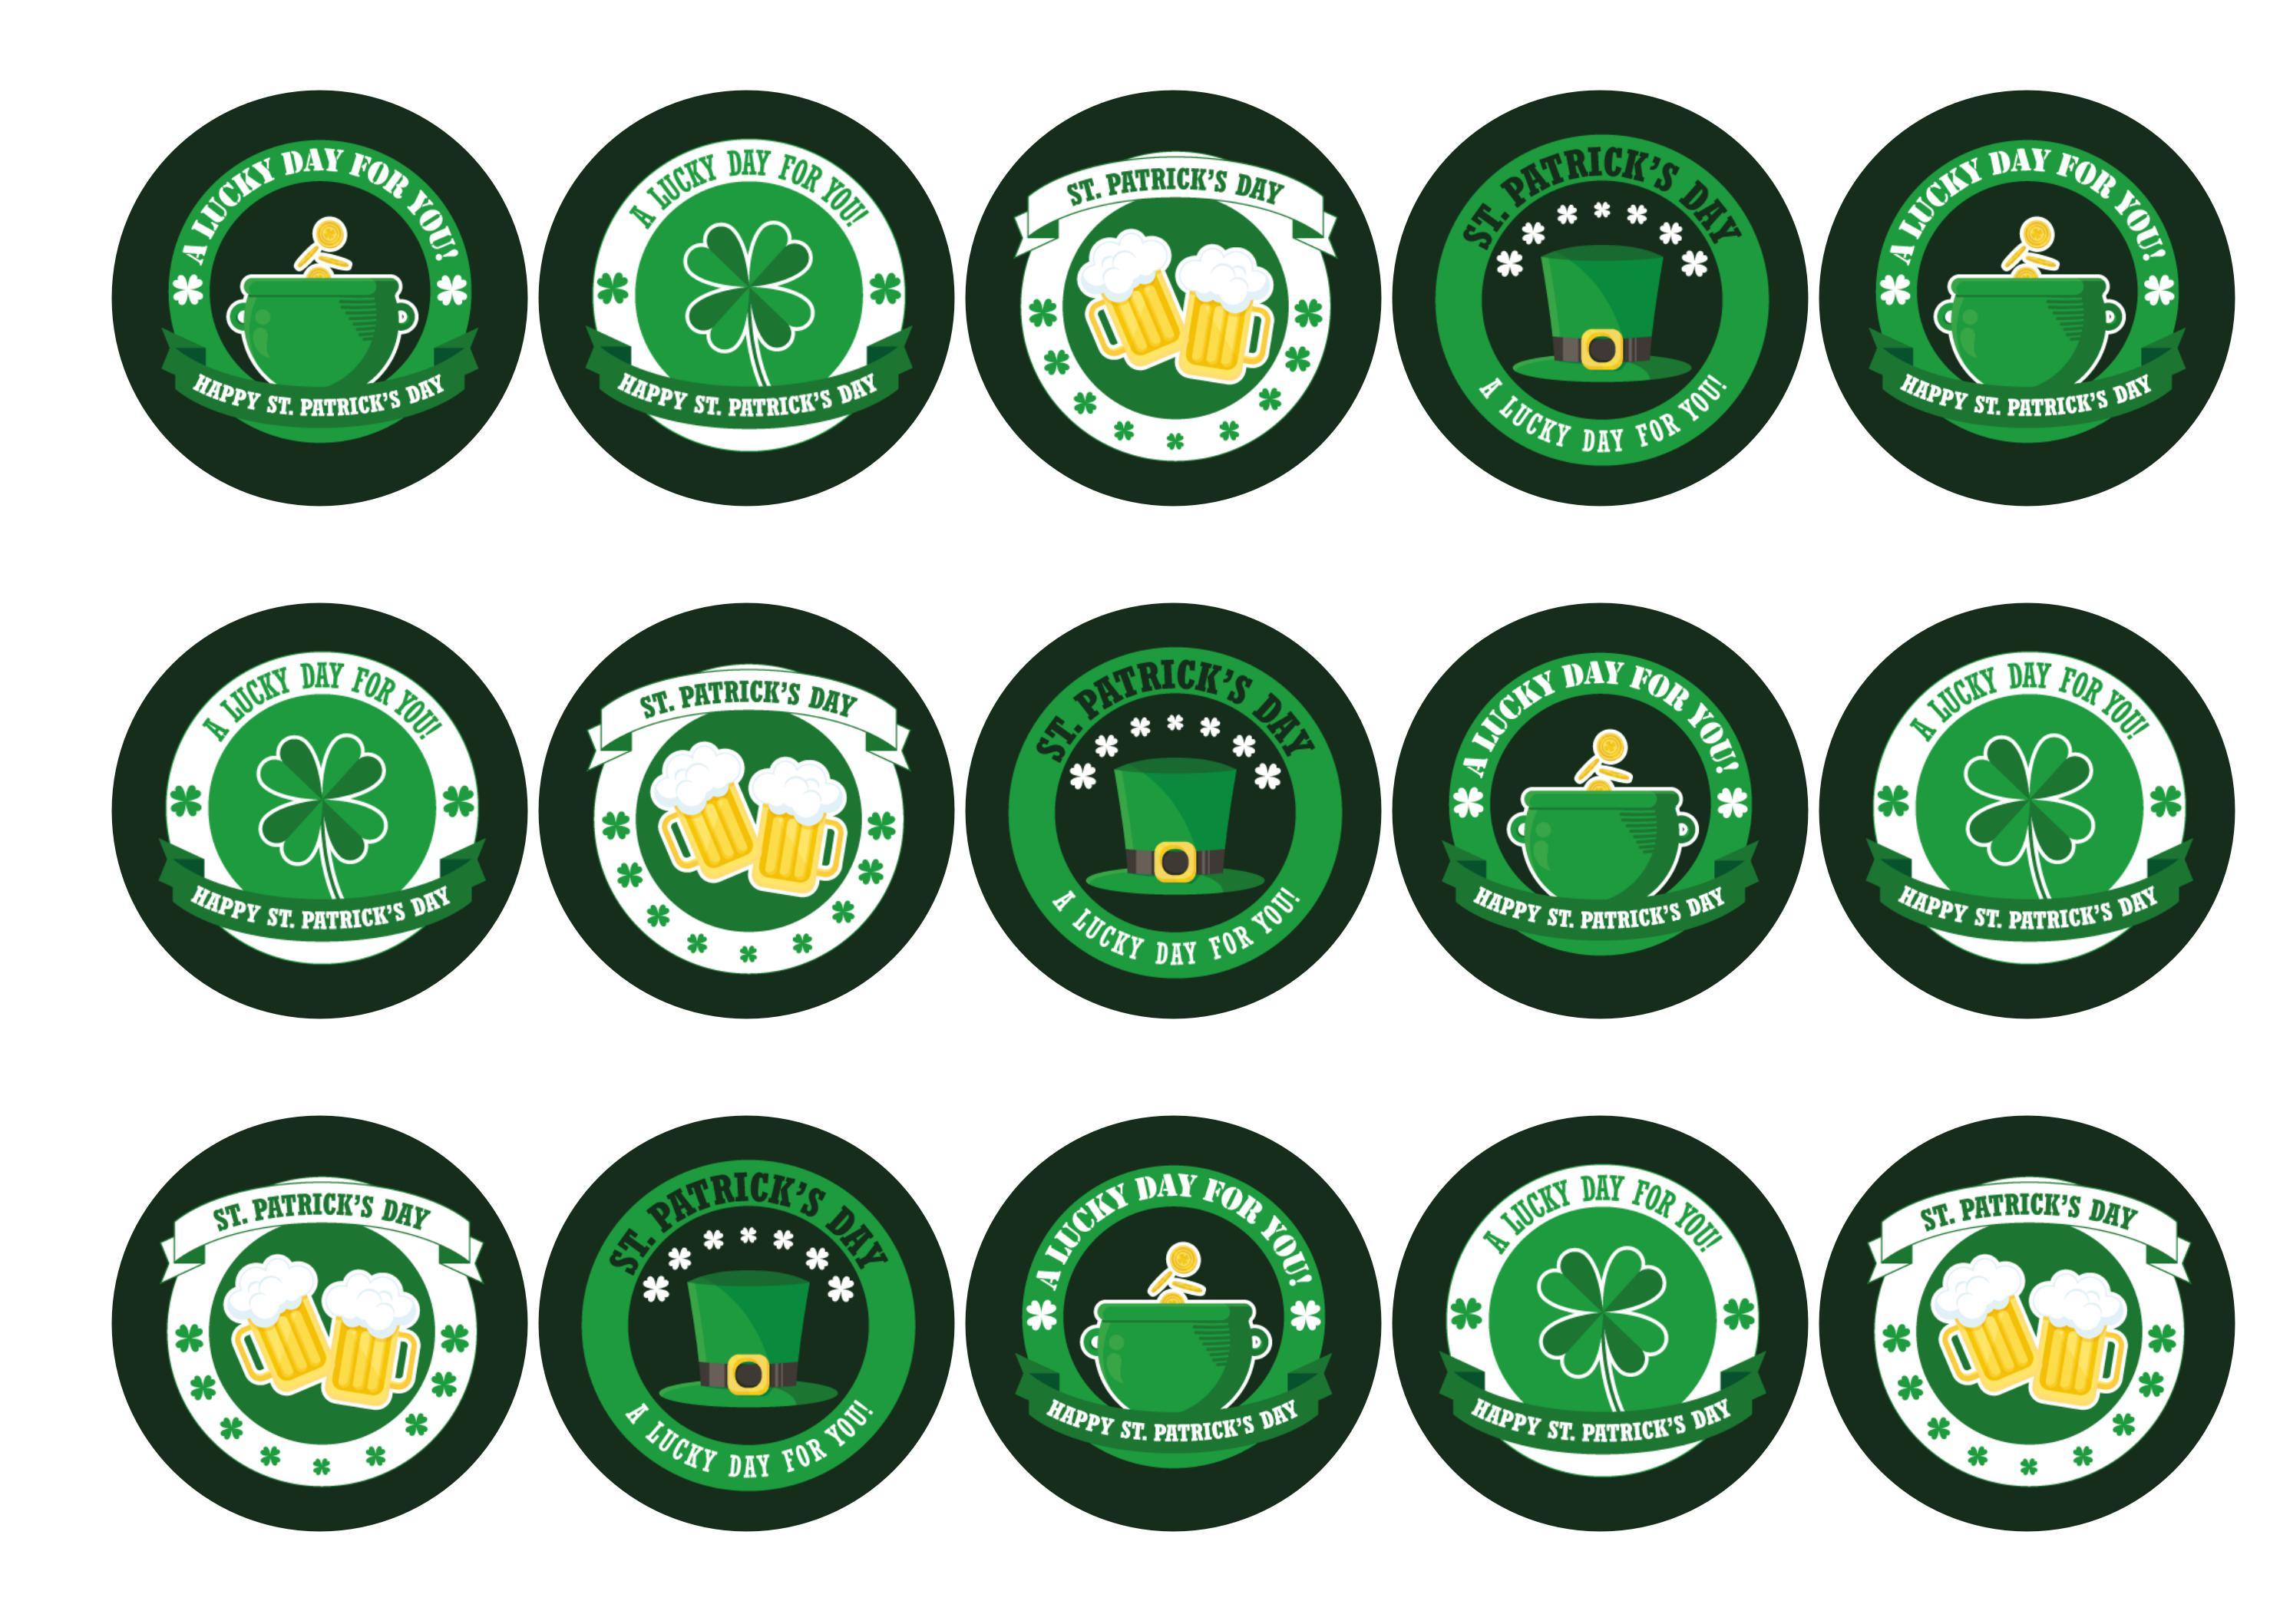 15 printed cupcake toppers with images for celebrating St Patricks Day